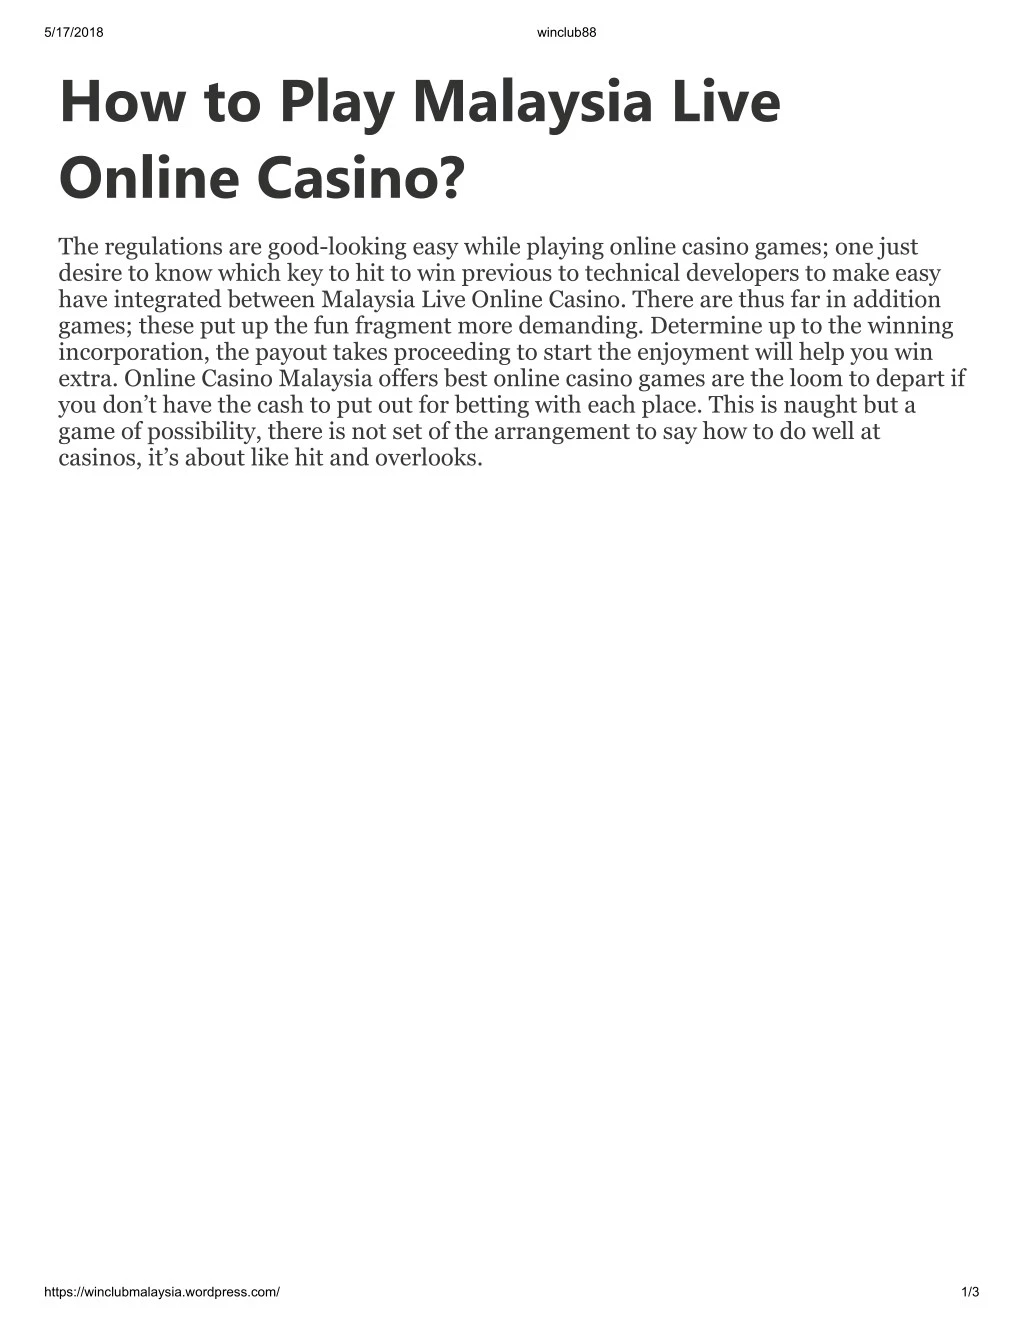 5 17 2018 how to play malaysia live online casino n.